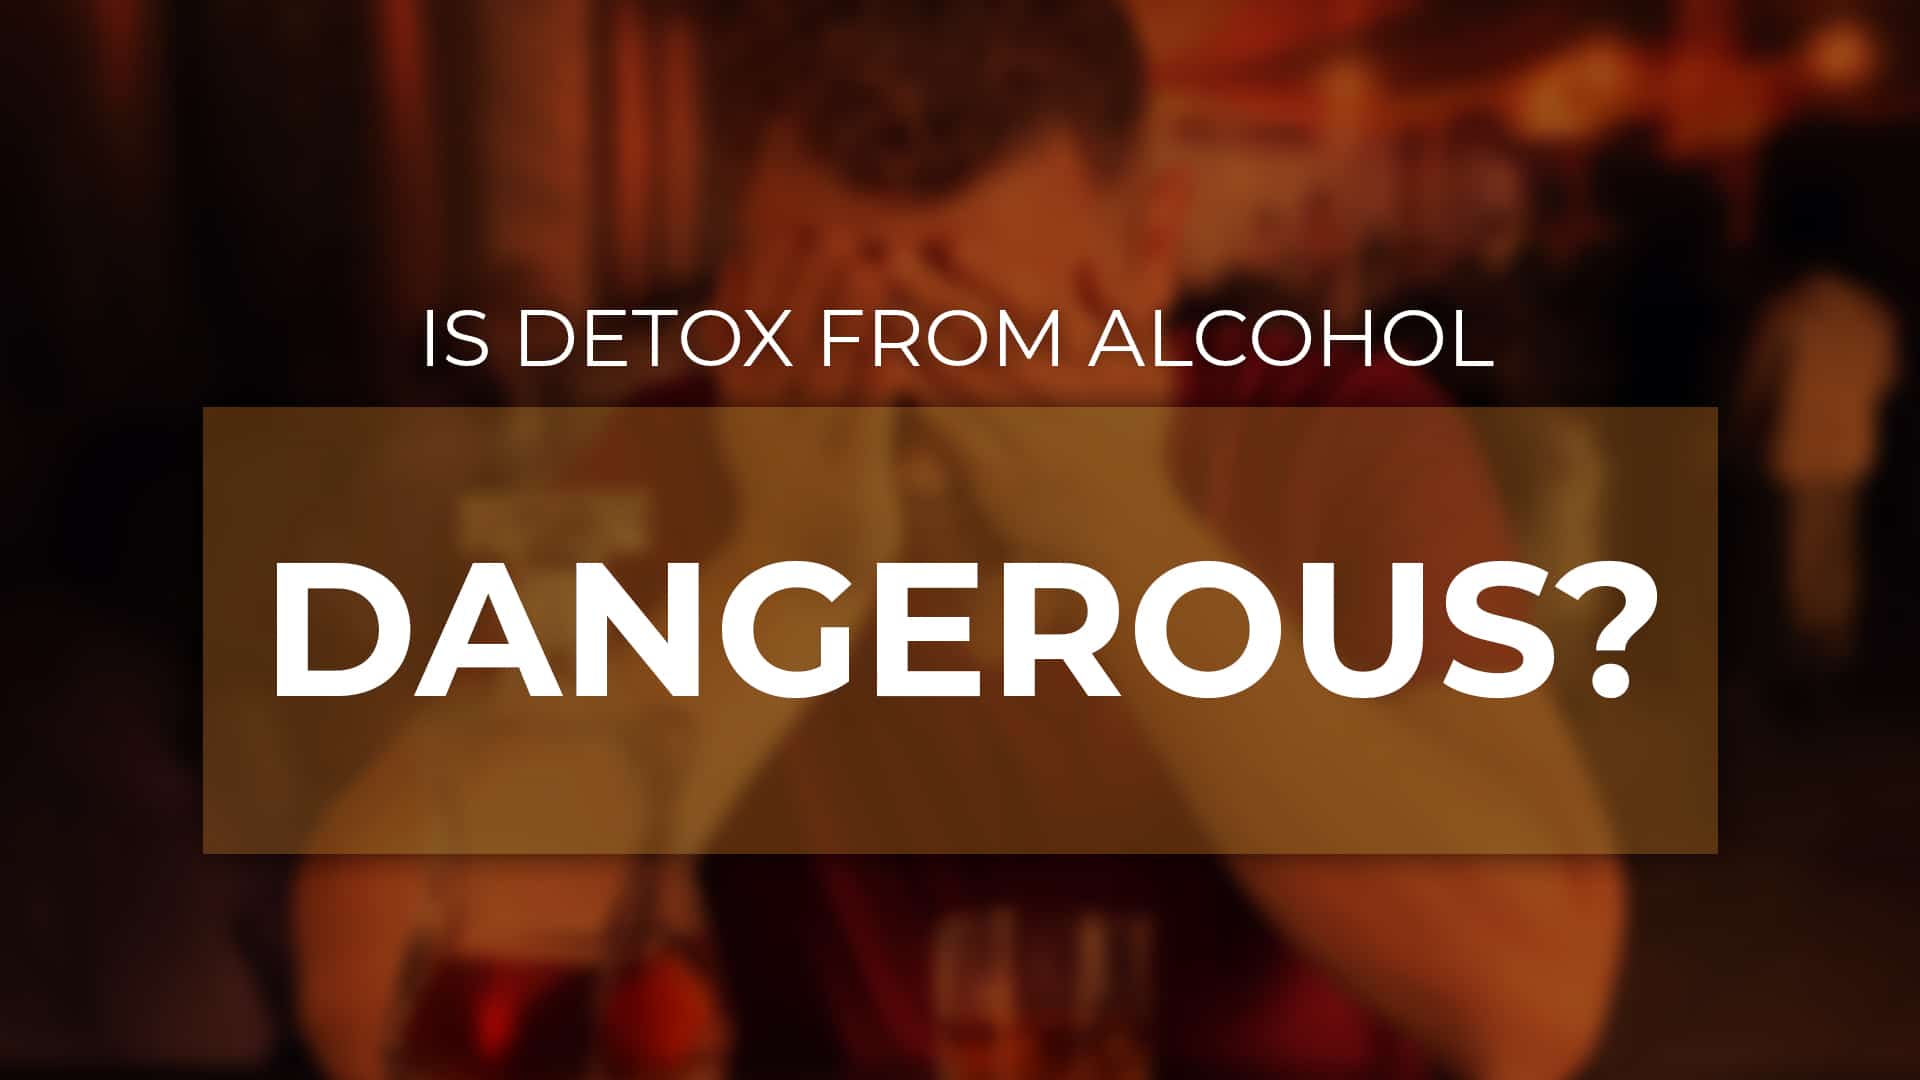 Is Detox from Alcohol Dangerous